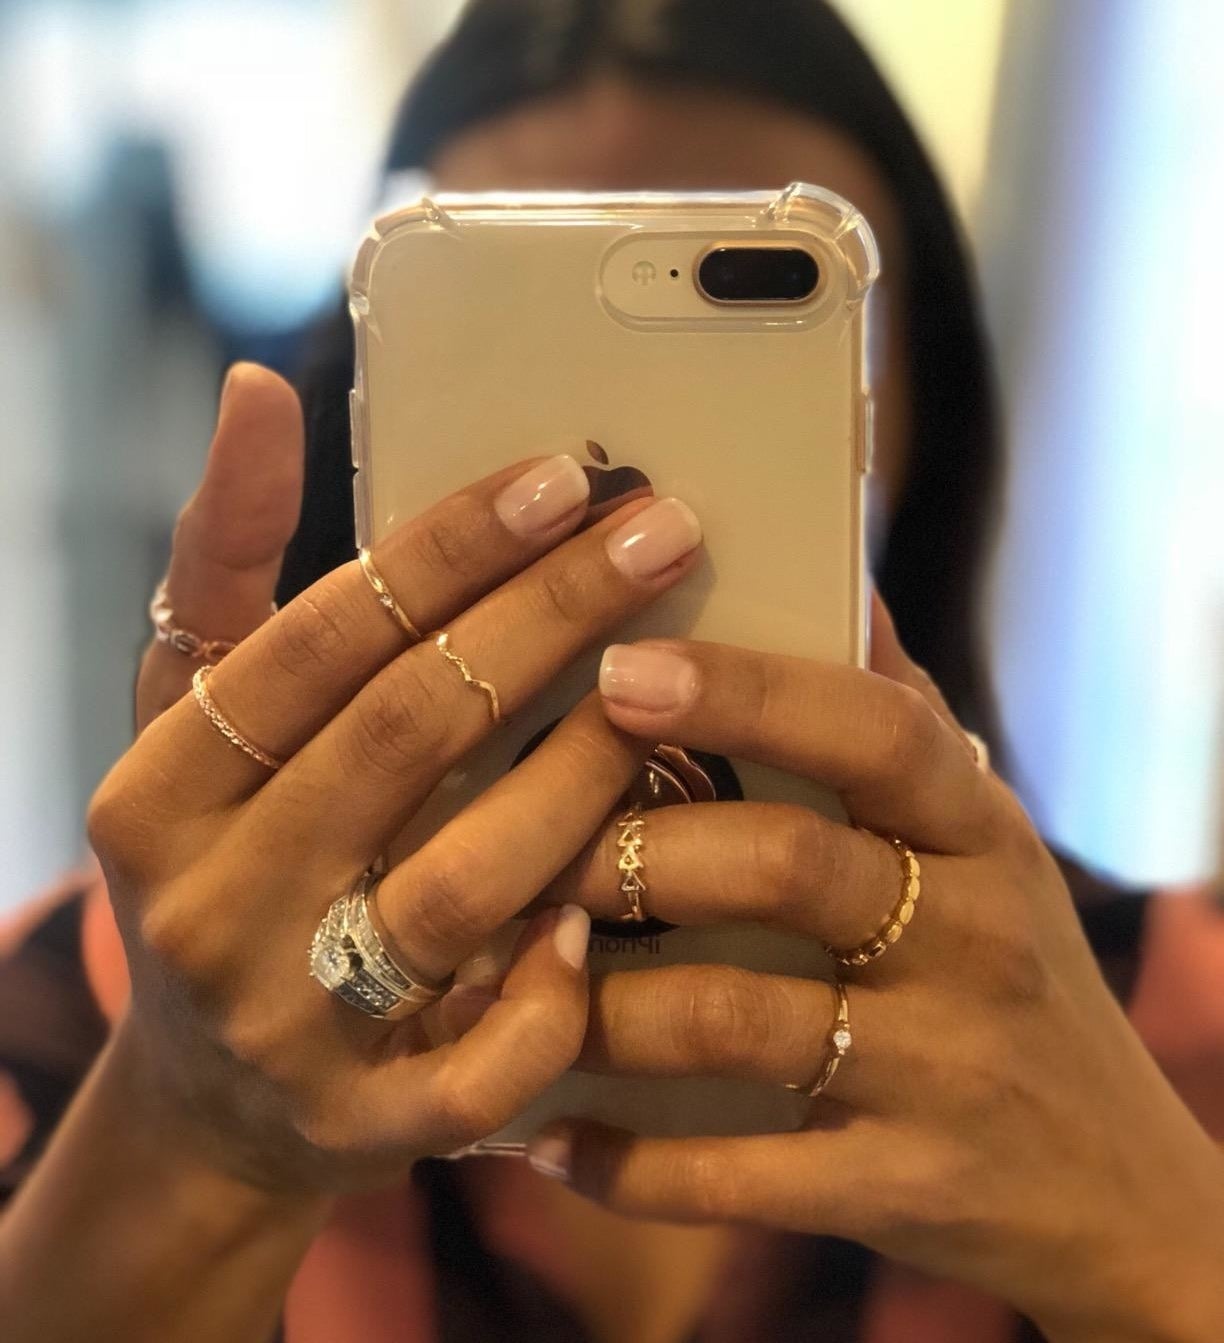 Reviewer is holding their camera up to a mirror to show off the stacked rings on their hands